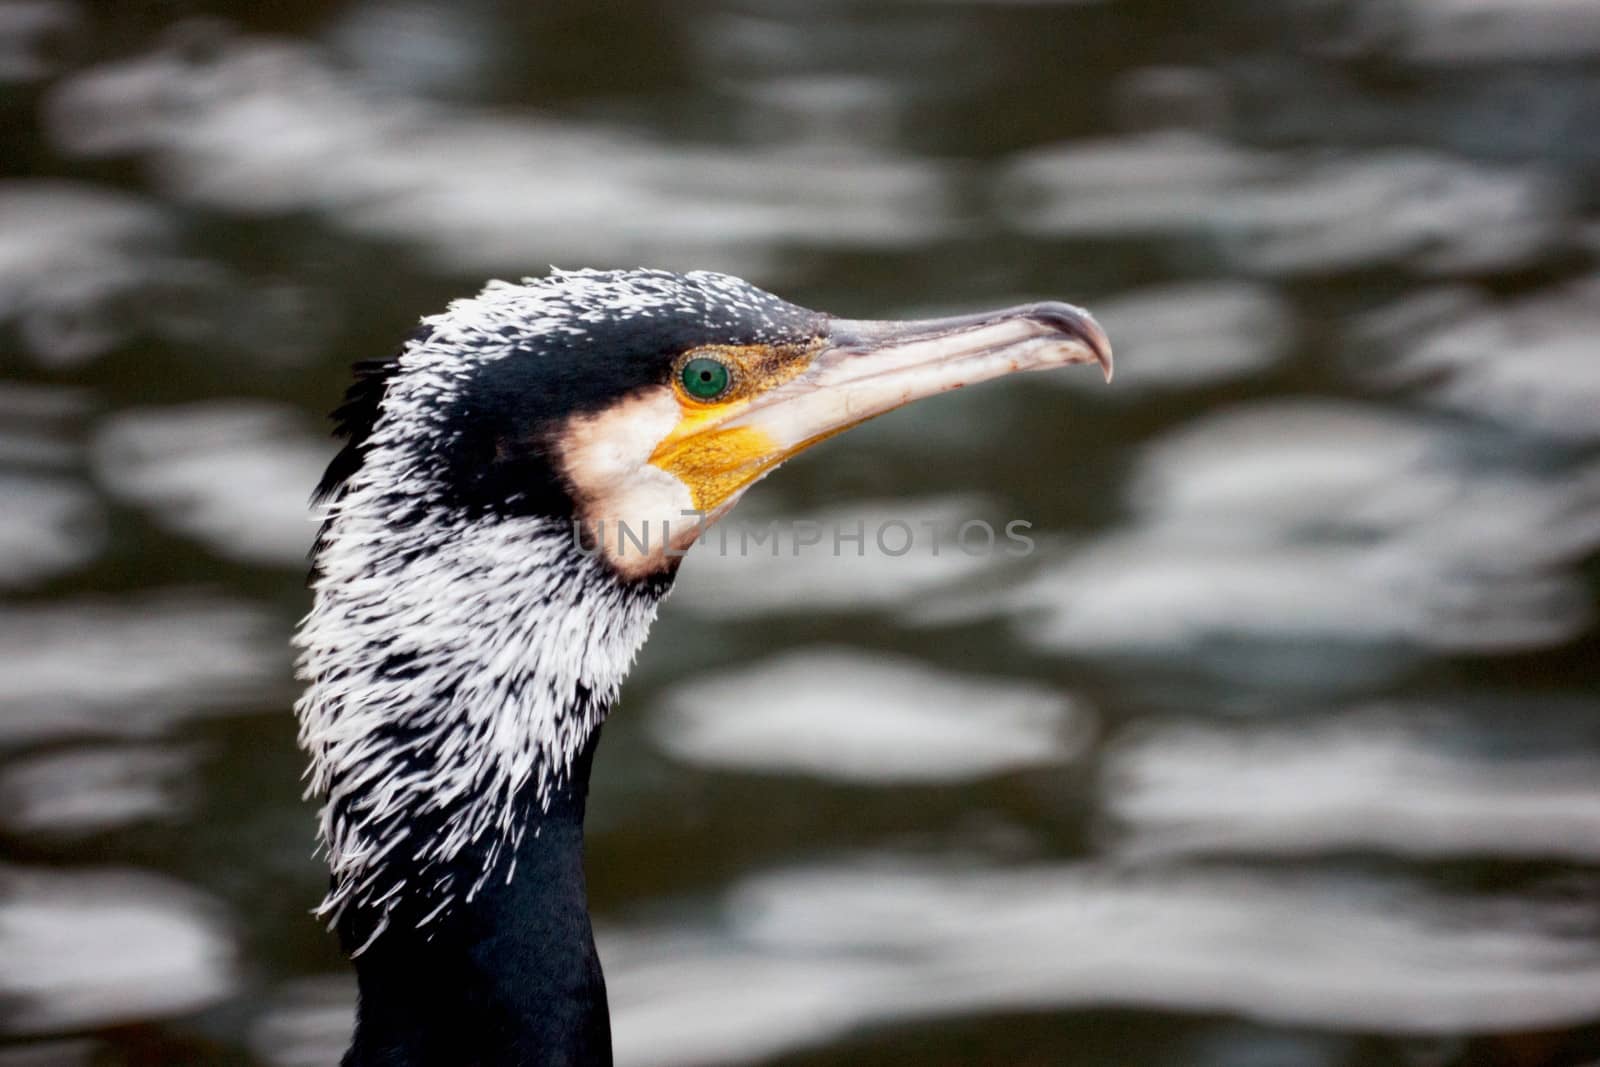  Great Cormorant by thomas_males